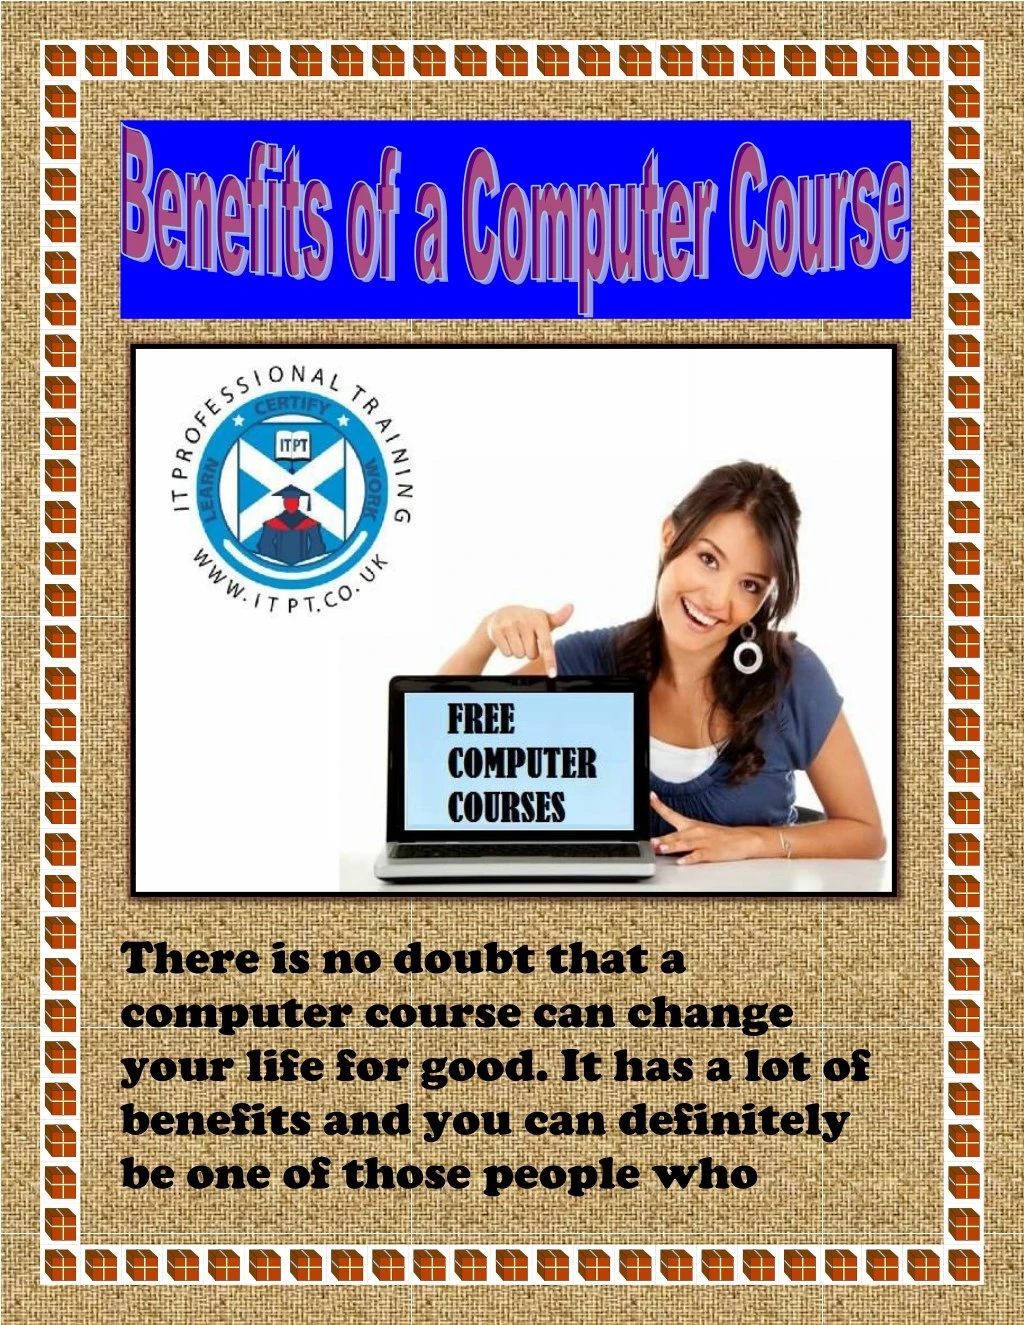 there is no doubt that a computer course